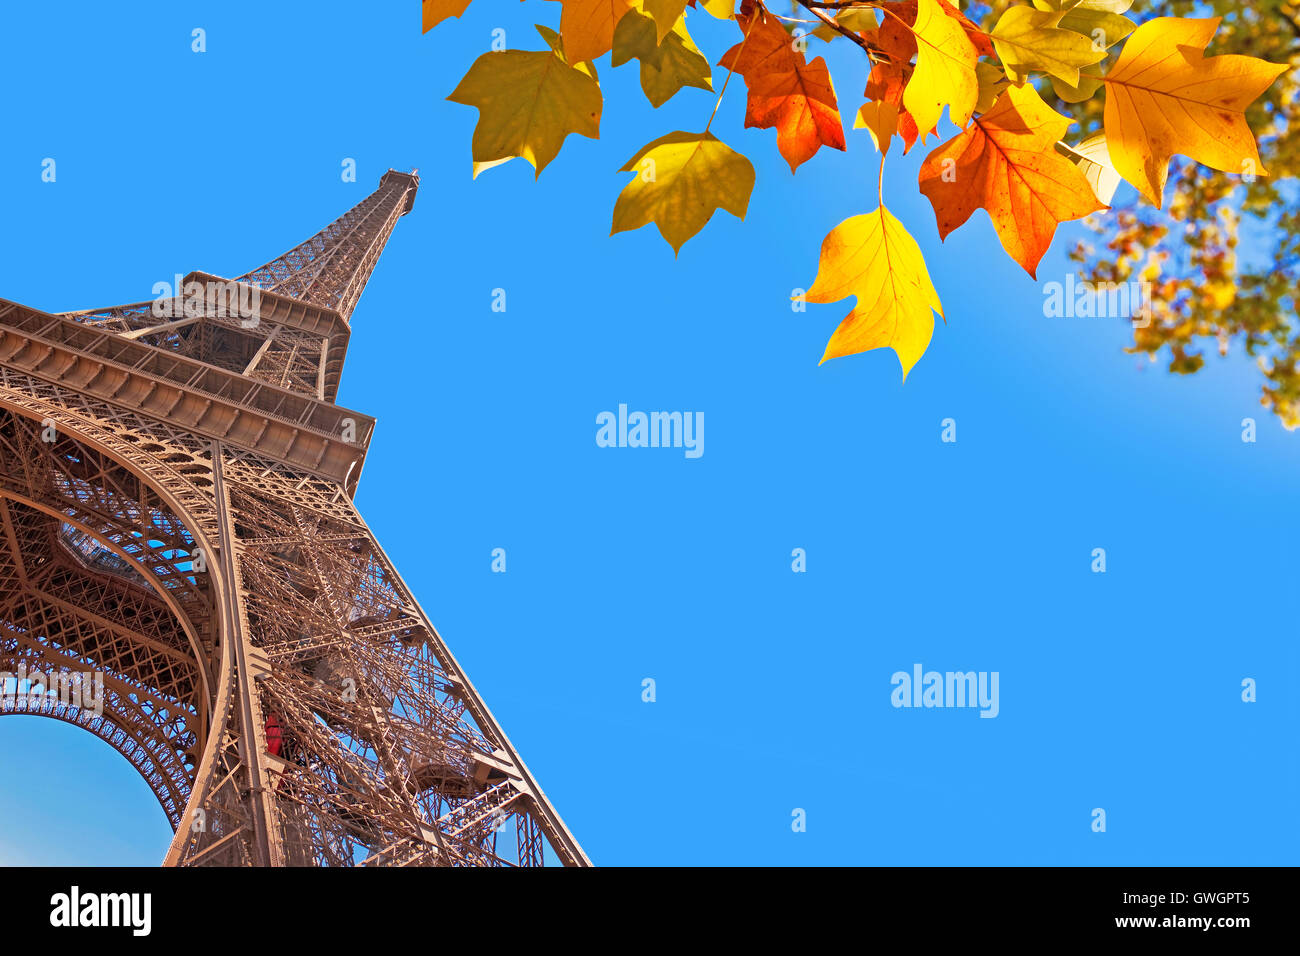 Eiffel tower and autumnal leaves, Paris, France Stock Photo